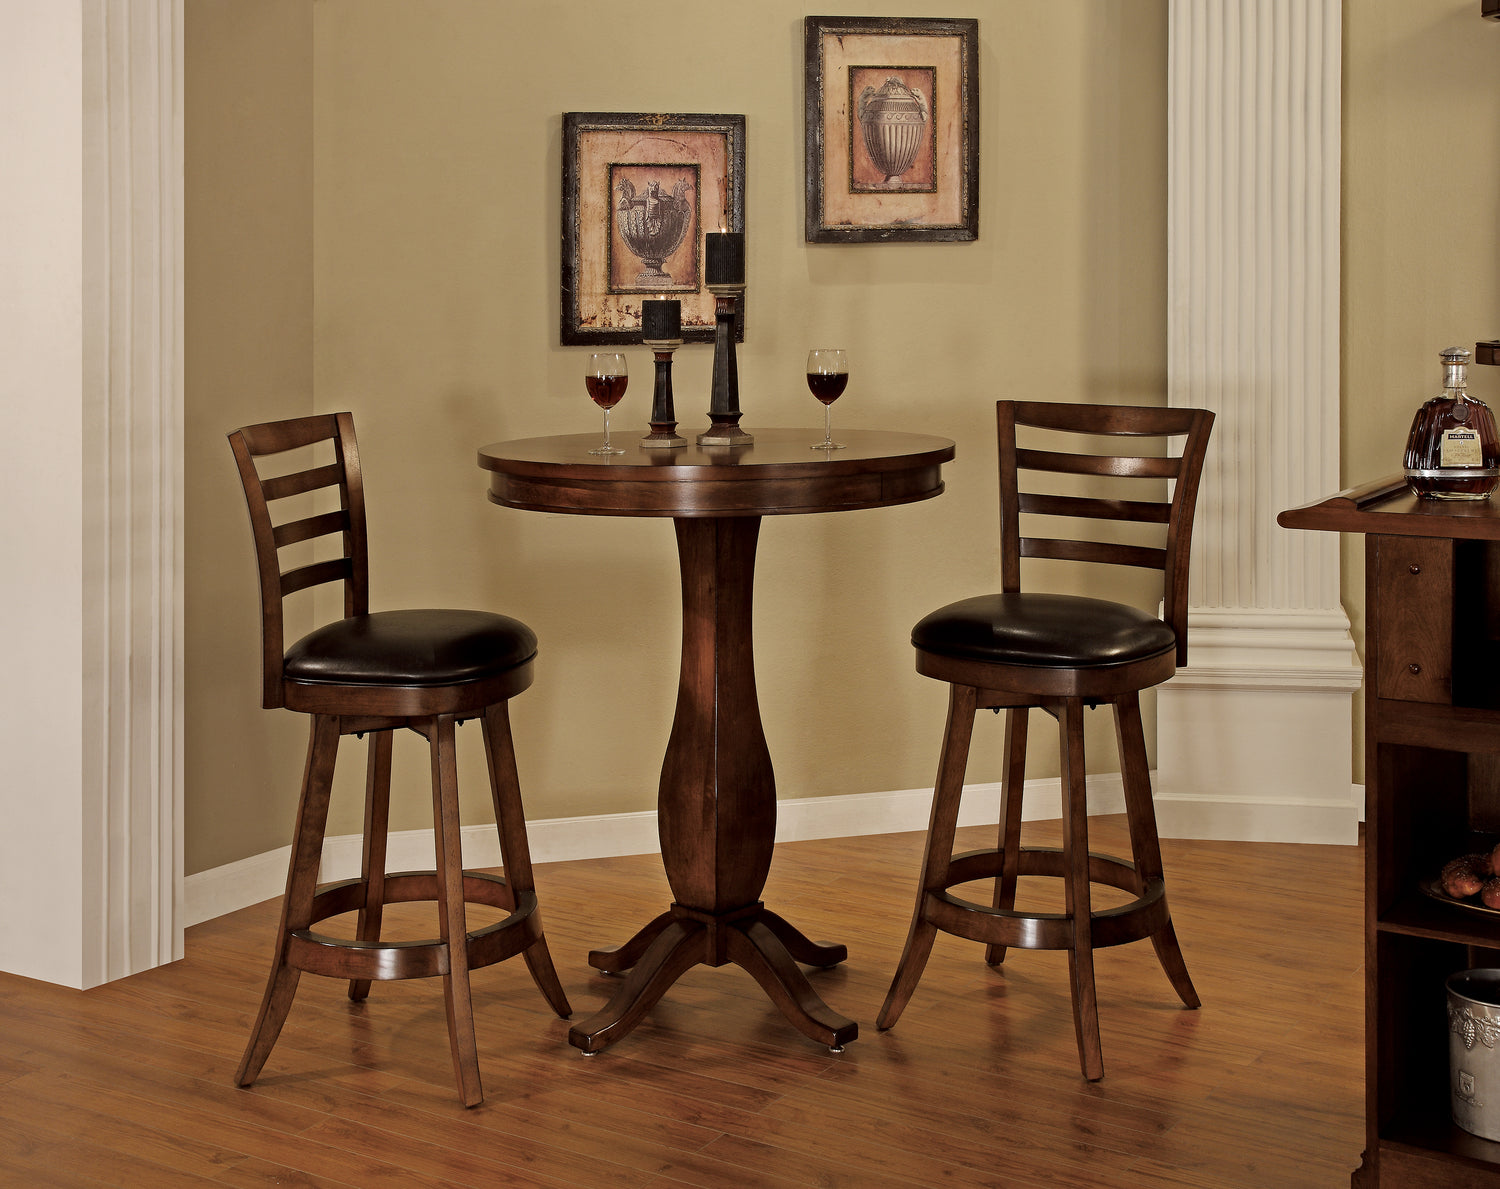 Legacy Billiards Sterling Backed Barstools with Sterling Pub Table Room Shot